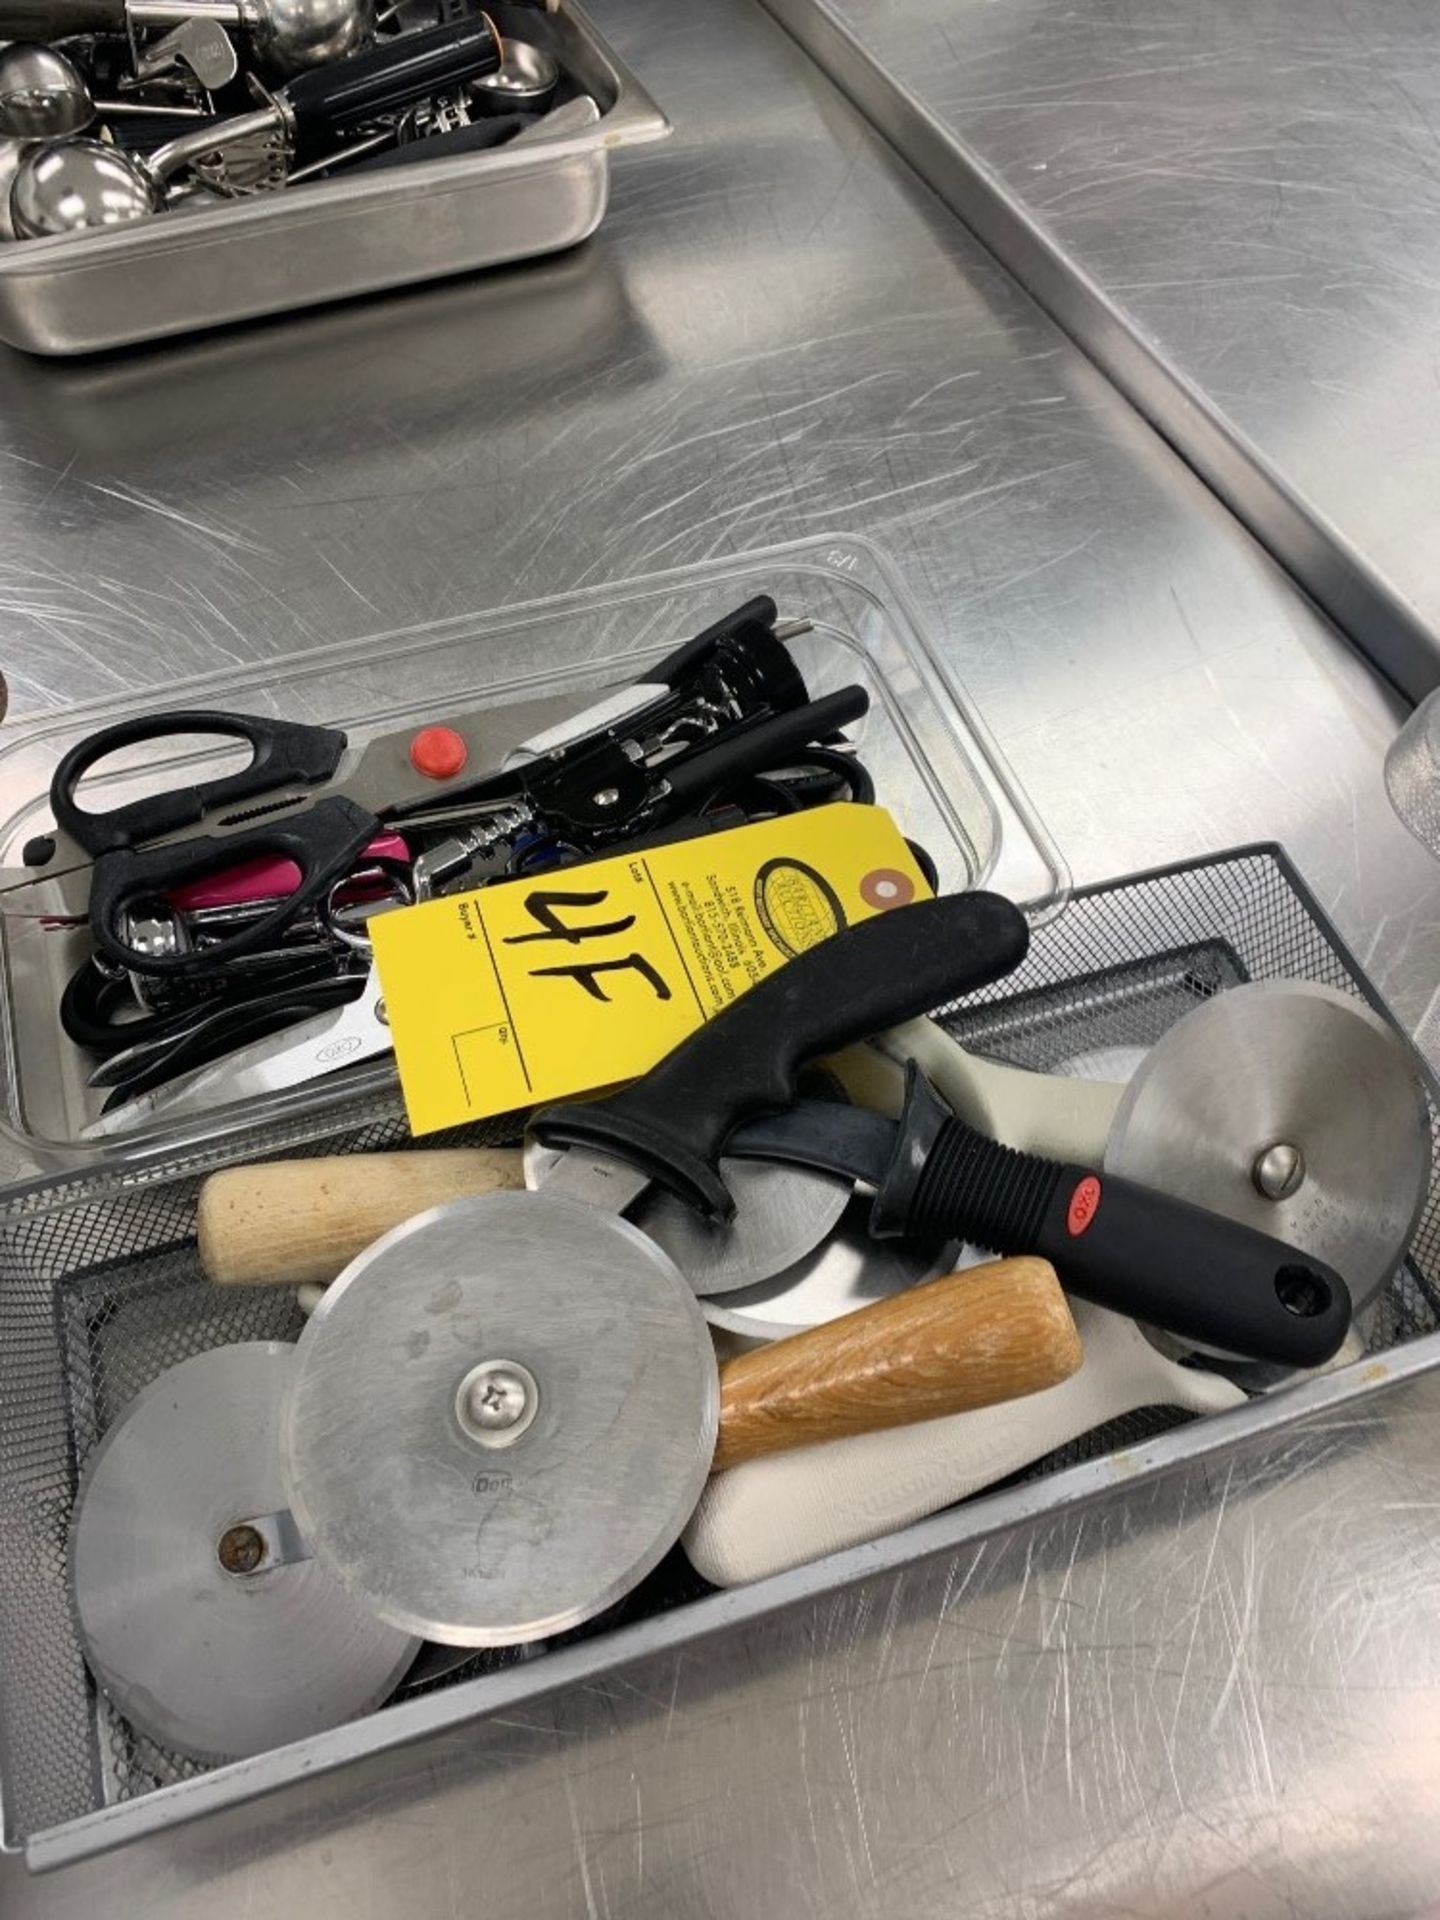 Lot Kitchen Utensils - Removal Is By Appointment Only-All Small Hand Carry Items-Removal Will Be - Image 5 of 5